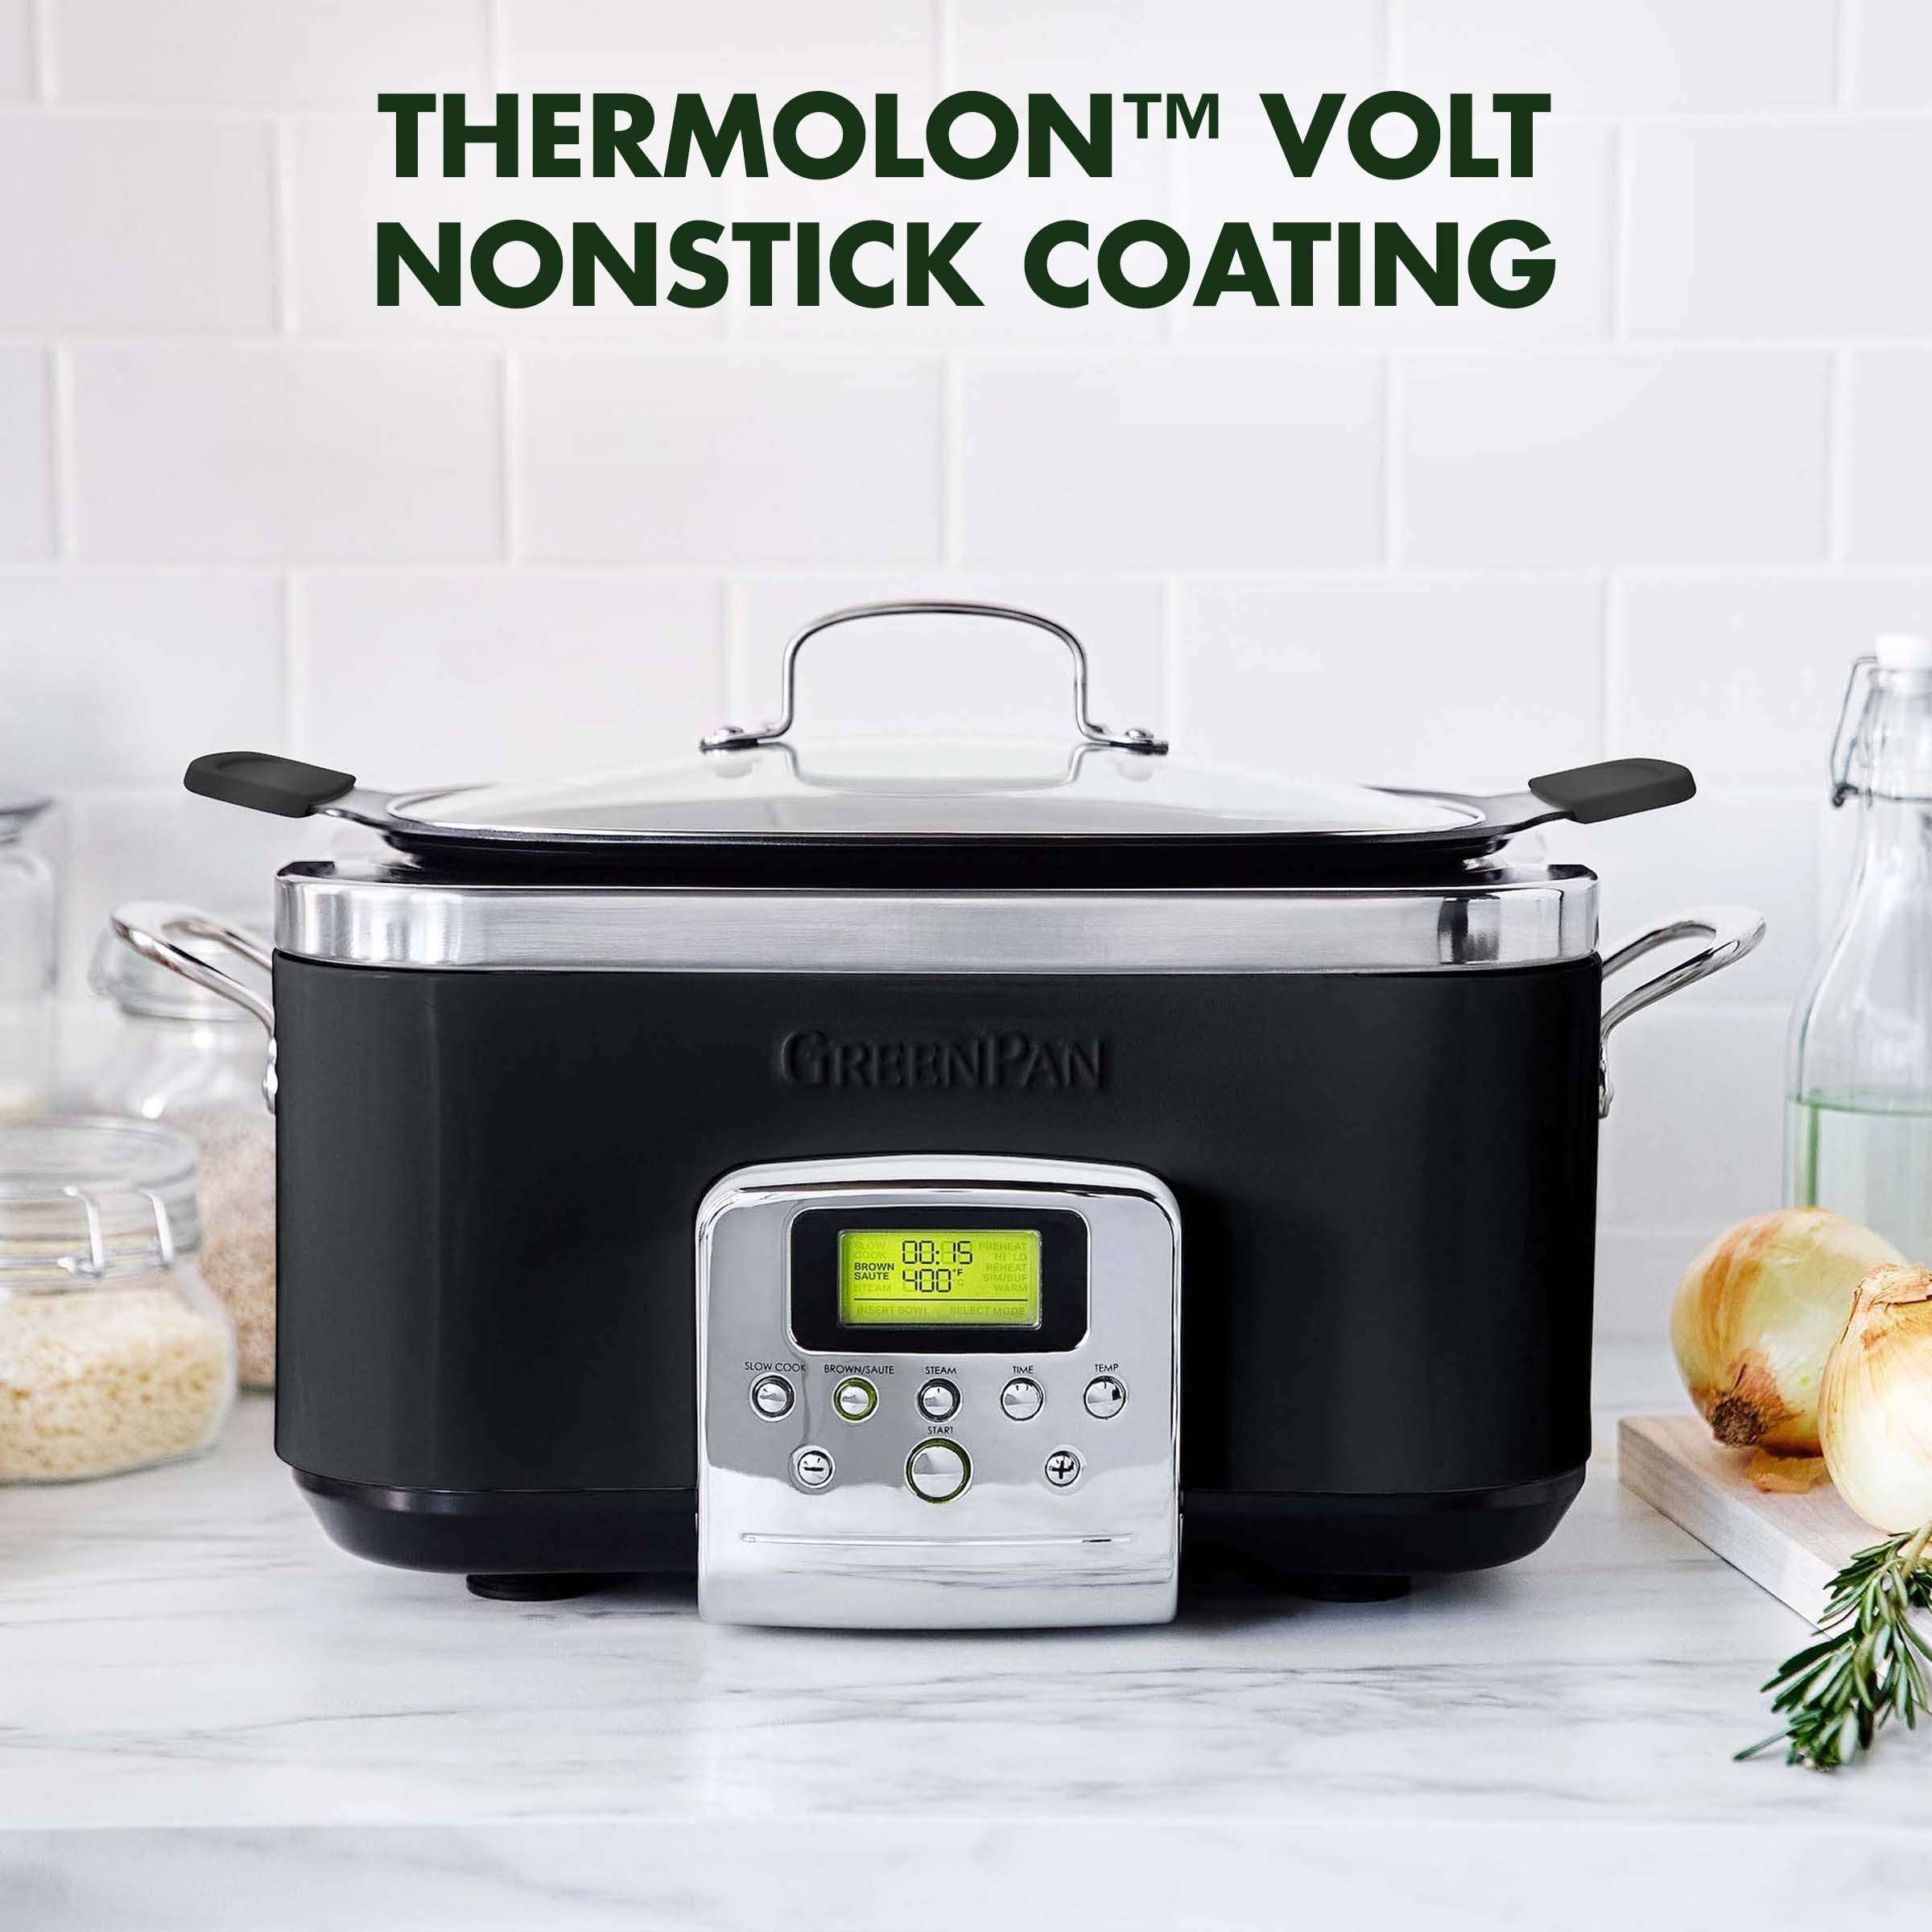 https://ak1.ostkcdn.com/images/products/is/images/direct/a425e426d8e1ba0e3f299d95effa85cde68e4a8c/GreenPan-Elite-6-Quart-Slow-Cooker.jpg